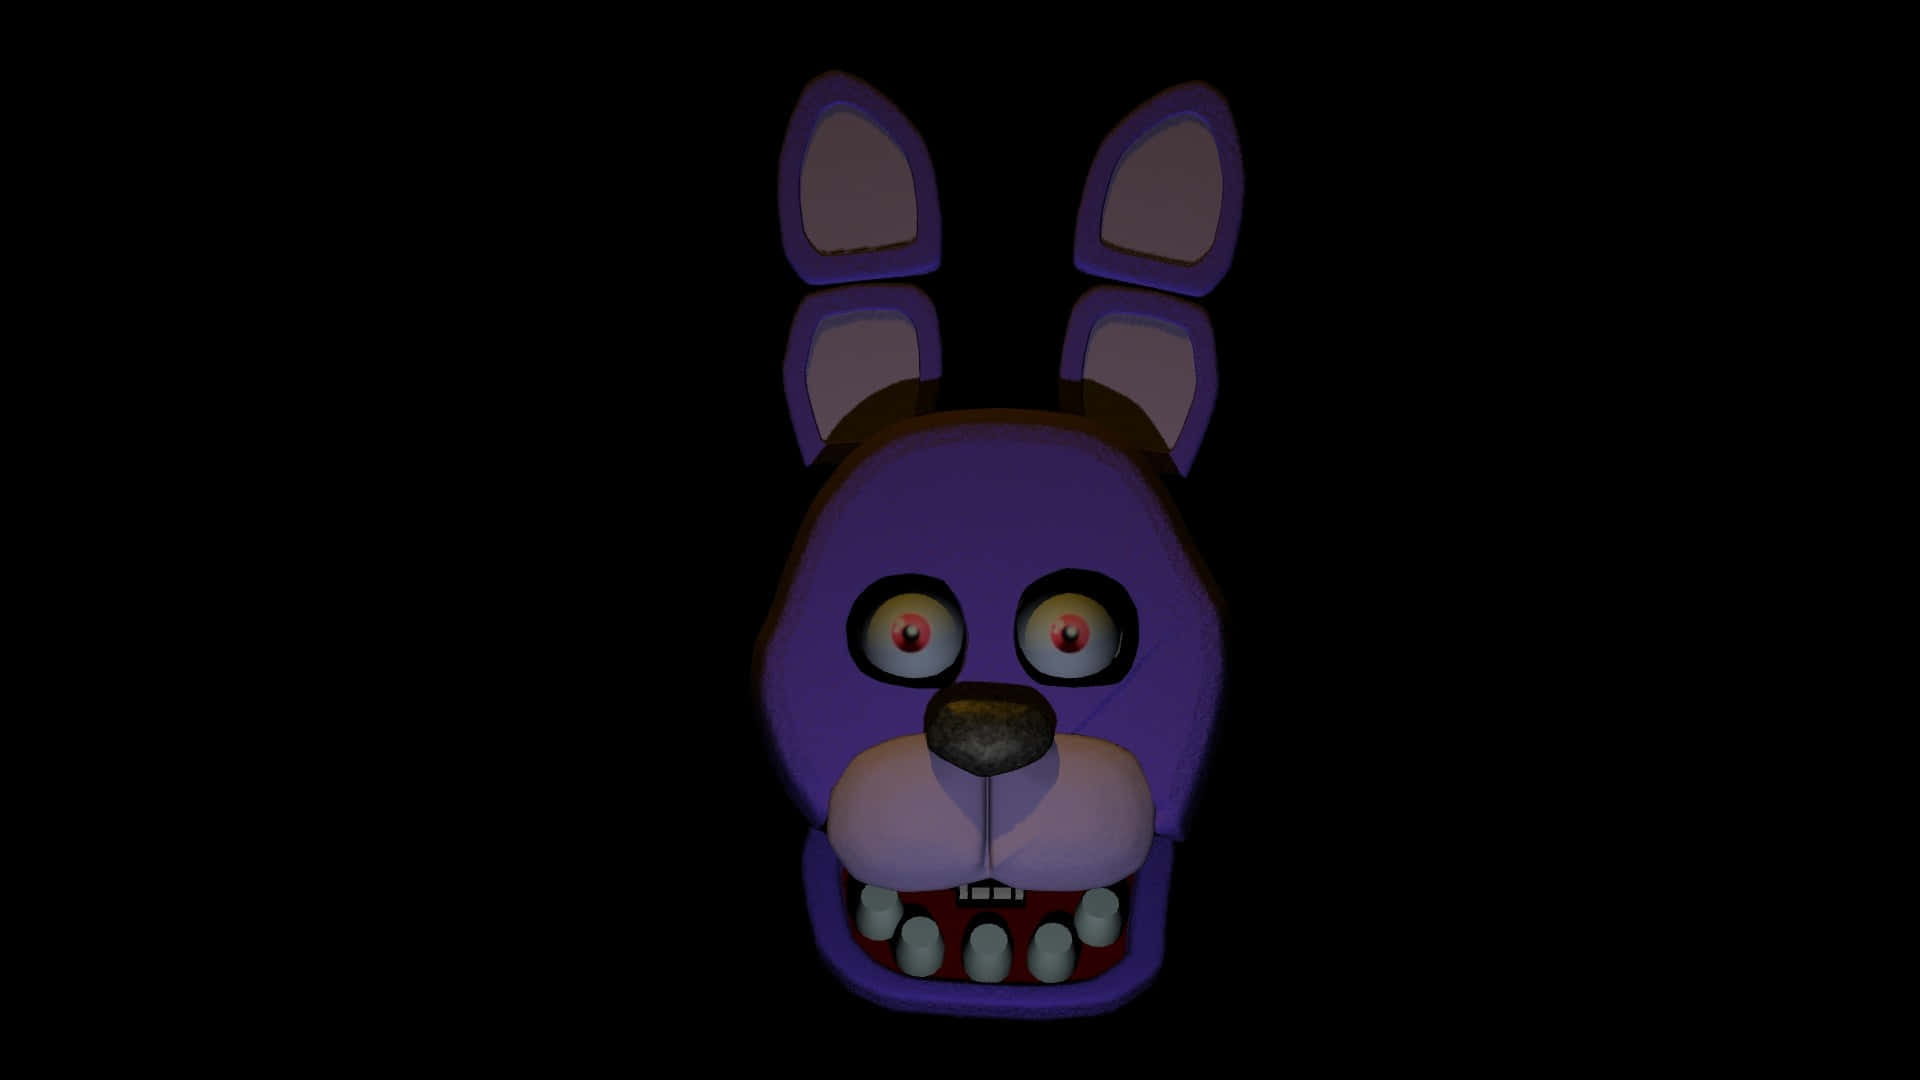 Caption: Animated Bonnie The Bunny striking a pose Wallpaper